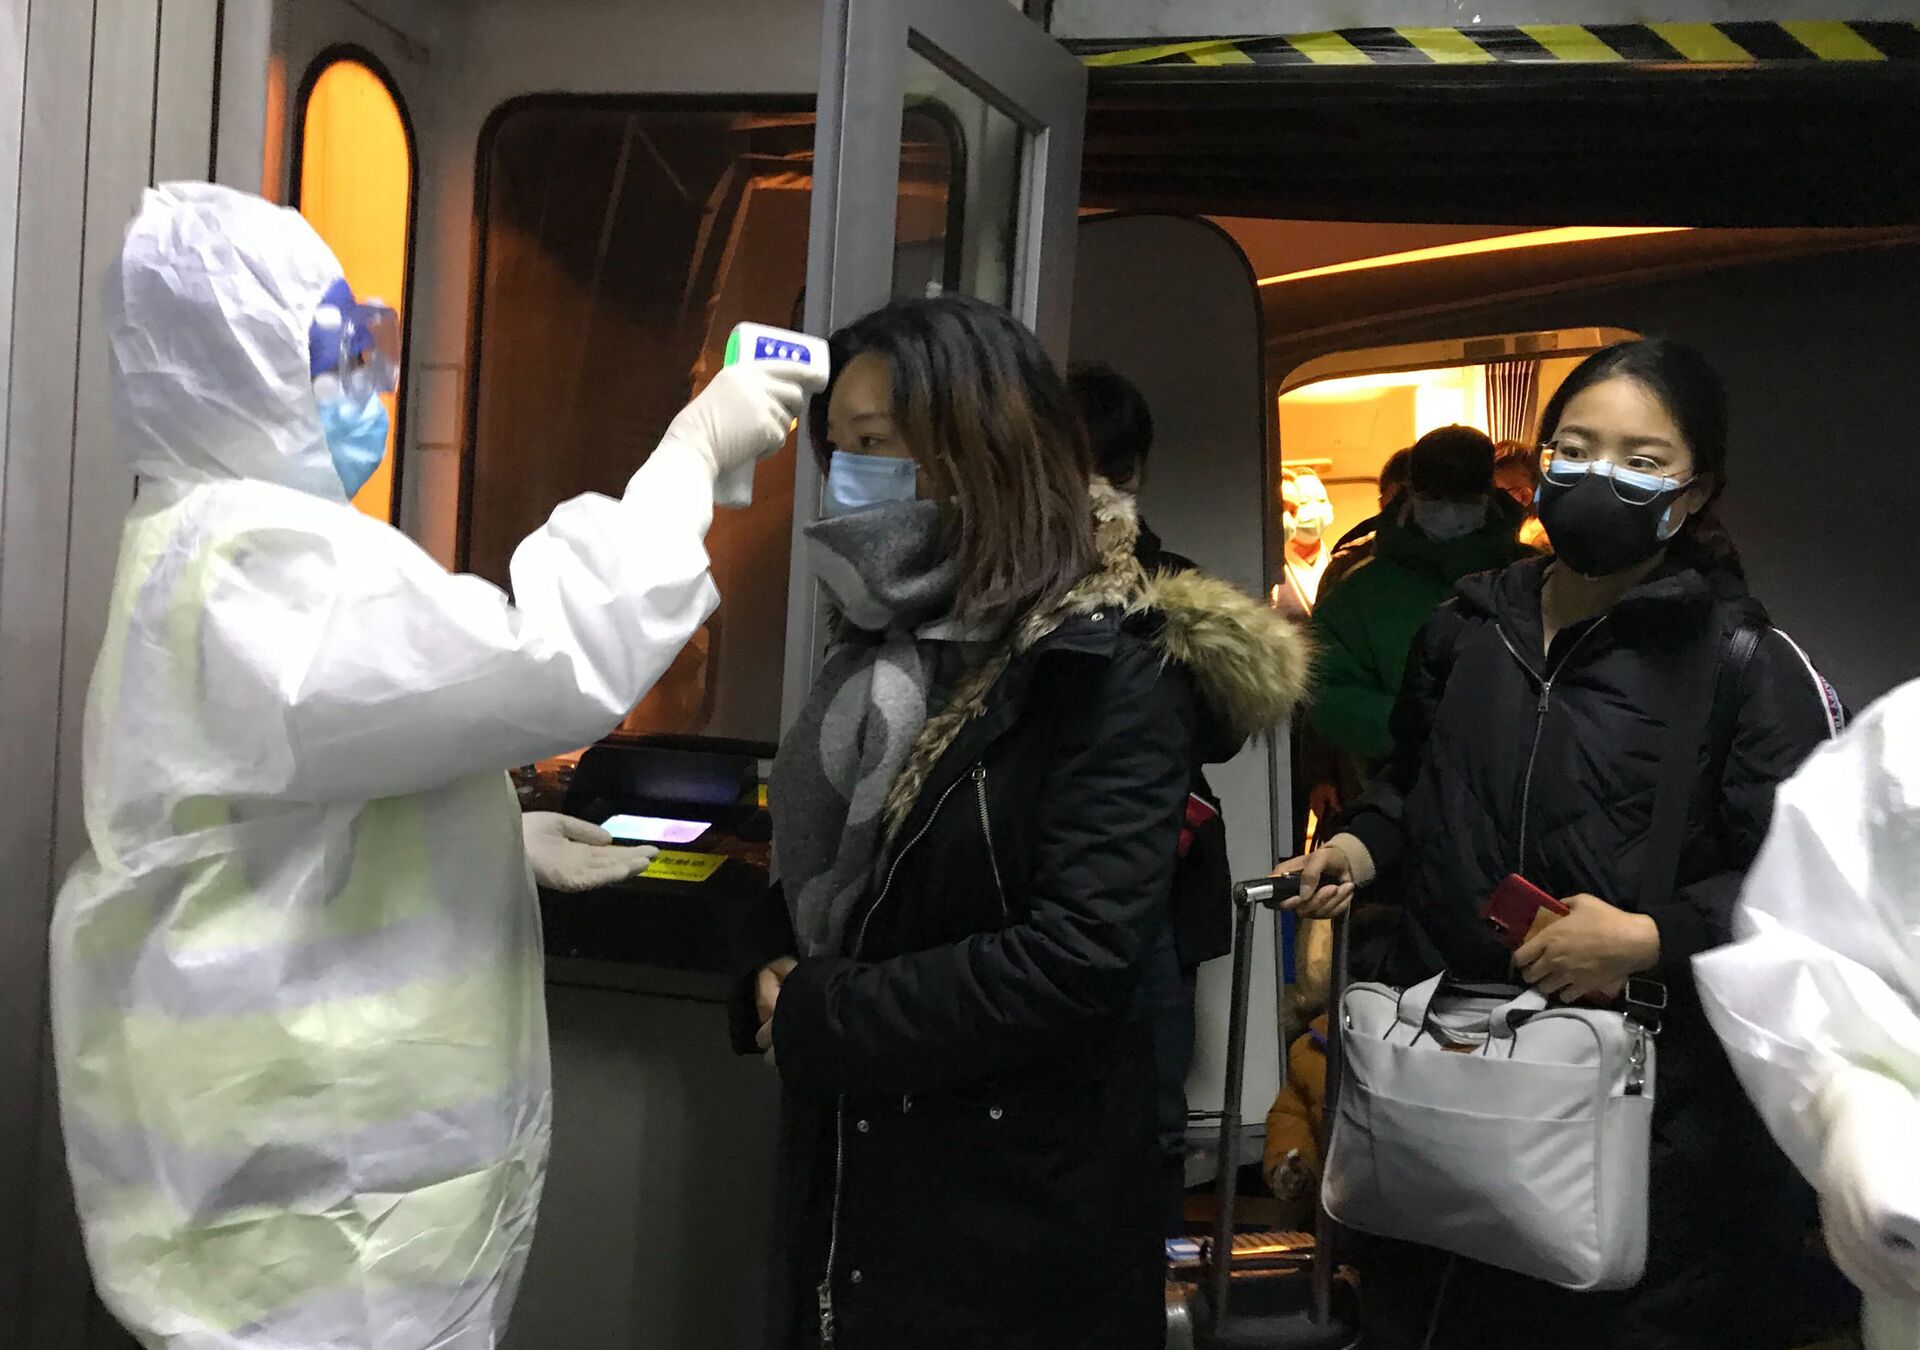 Health Officials in hazmat suits check body temperatures of passengers arriving from the city of Wuhan Wednesday, Jan. 22, 2020, at the airport in Beijing, China - Sputnik International, 1920, 07.09.2021